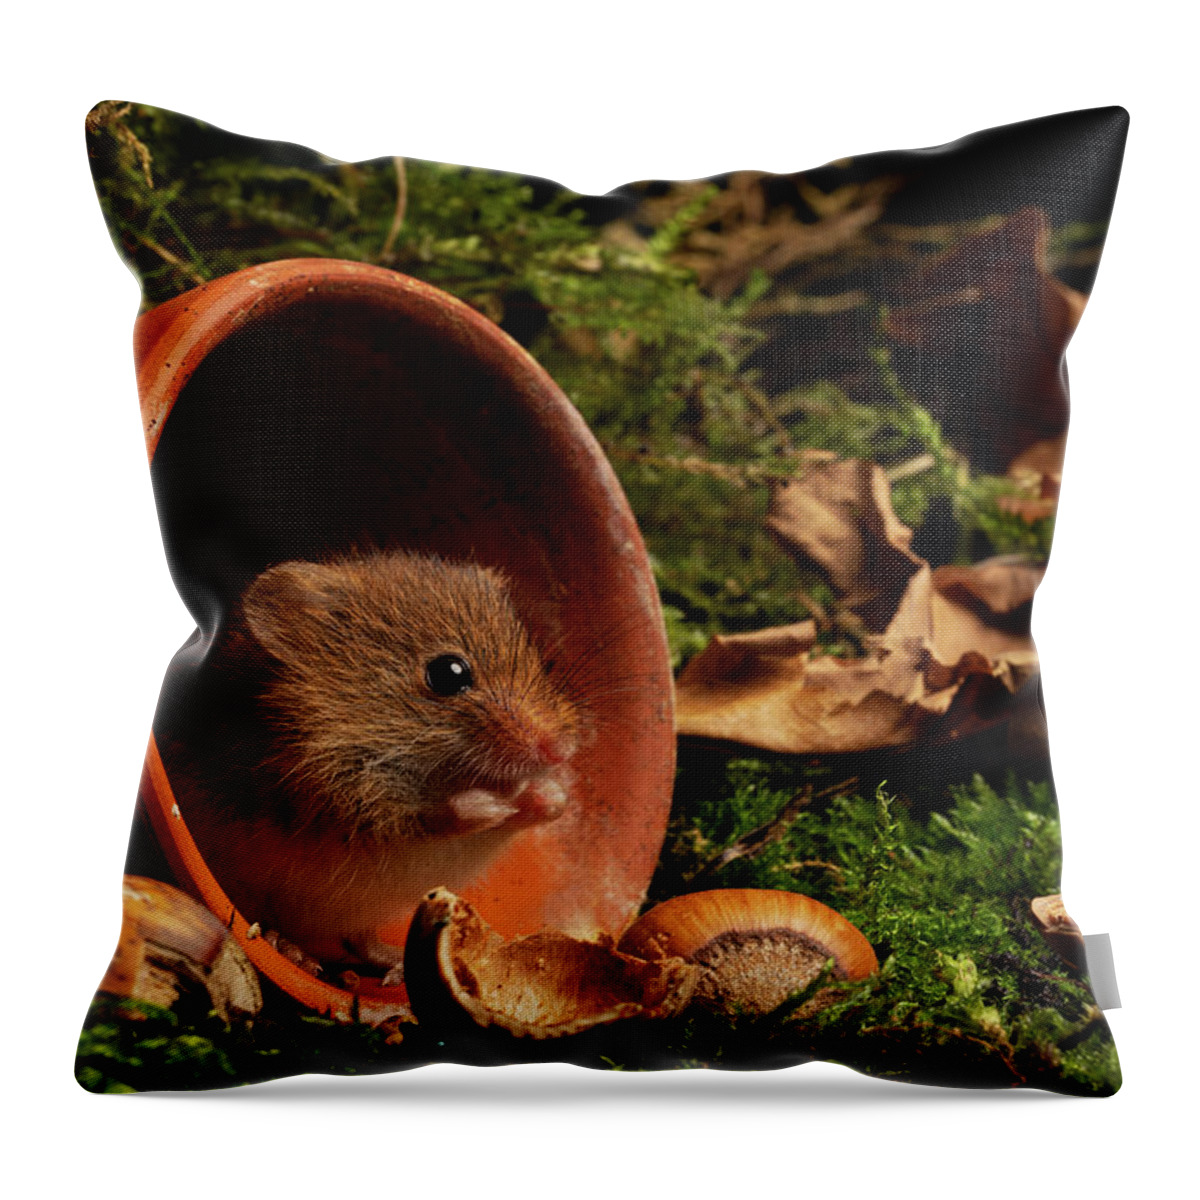 Harvest Throw Pillow featuring the photograph Hm-00950 by Miles Herbert